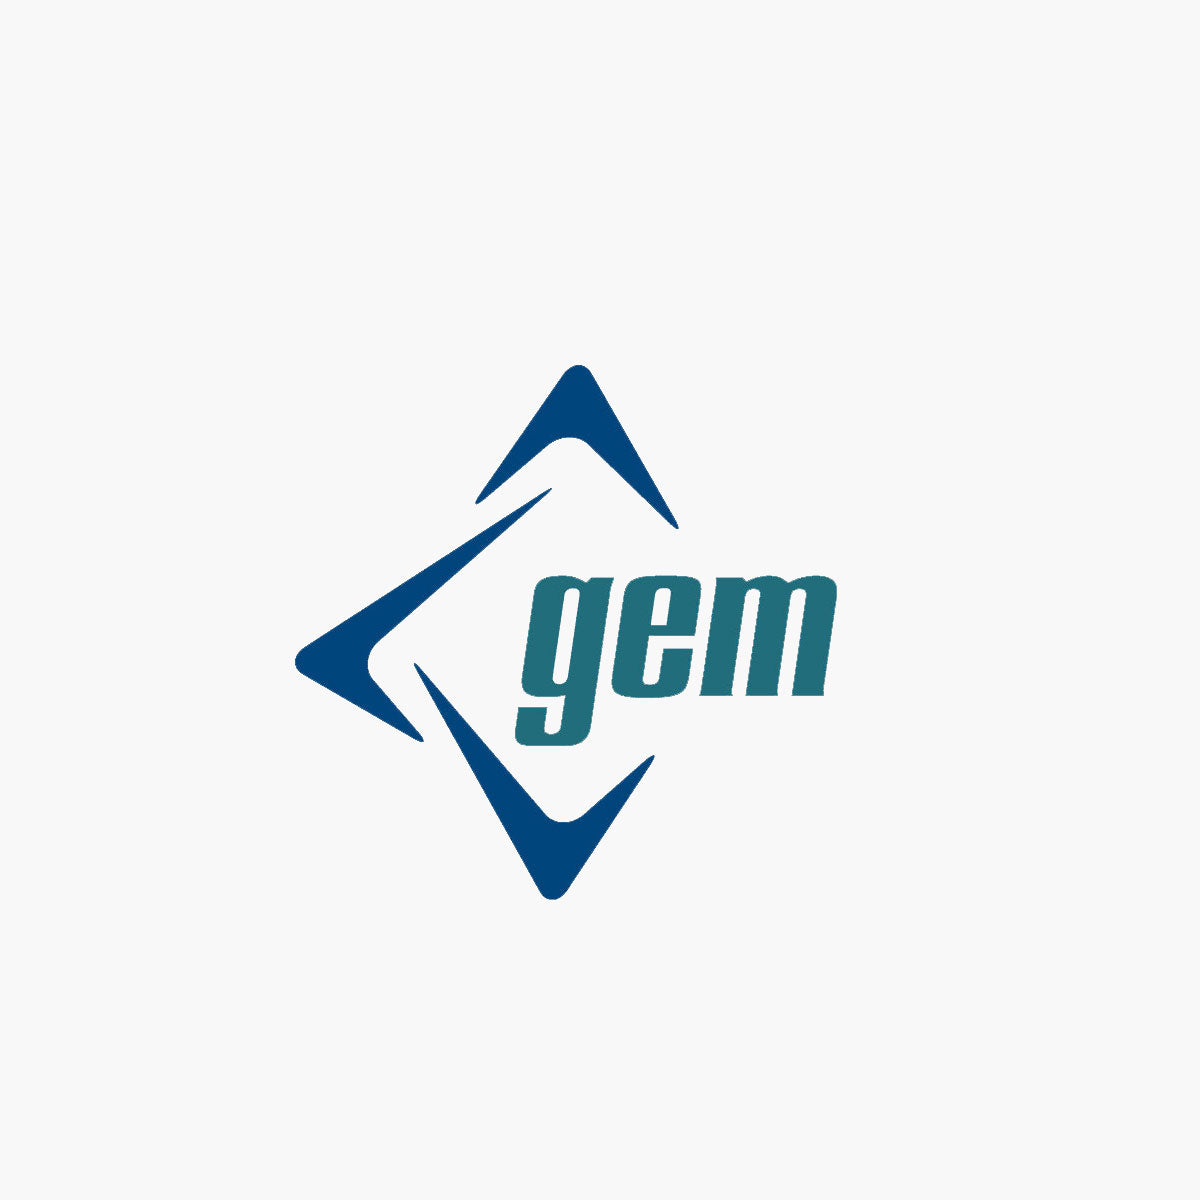 Hire Shopify Experts to integrate GEM Worldwide app into a Shopify store